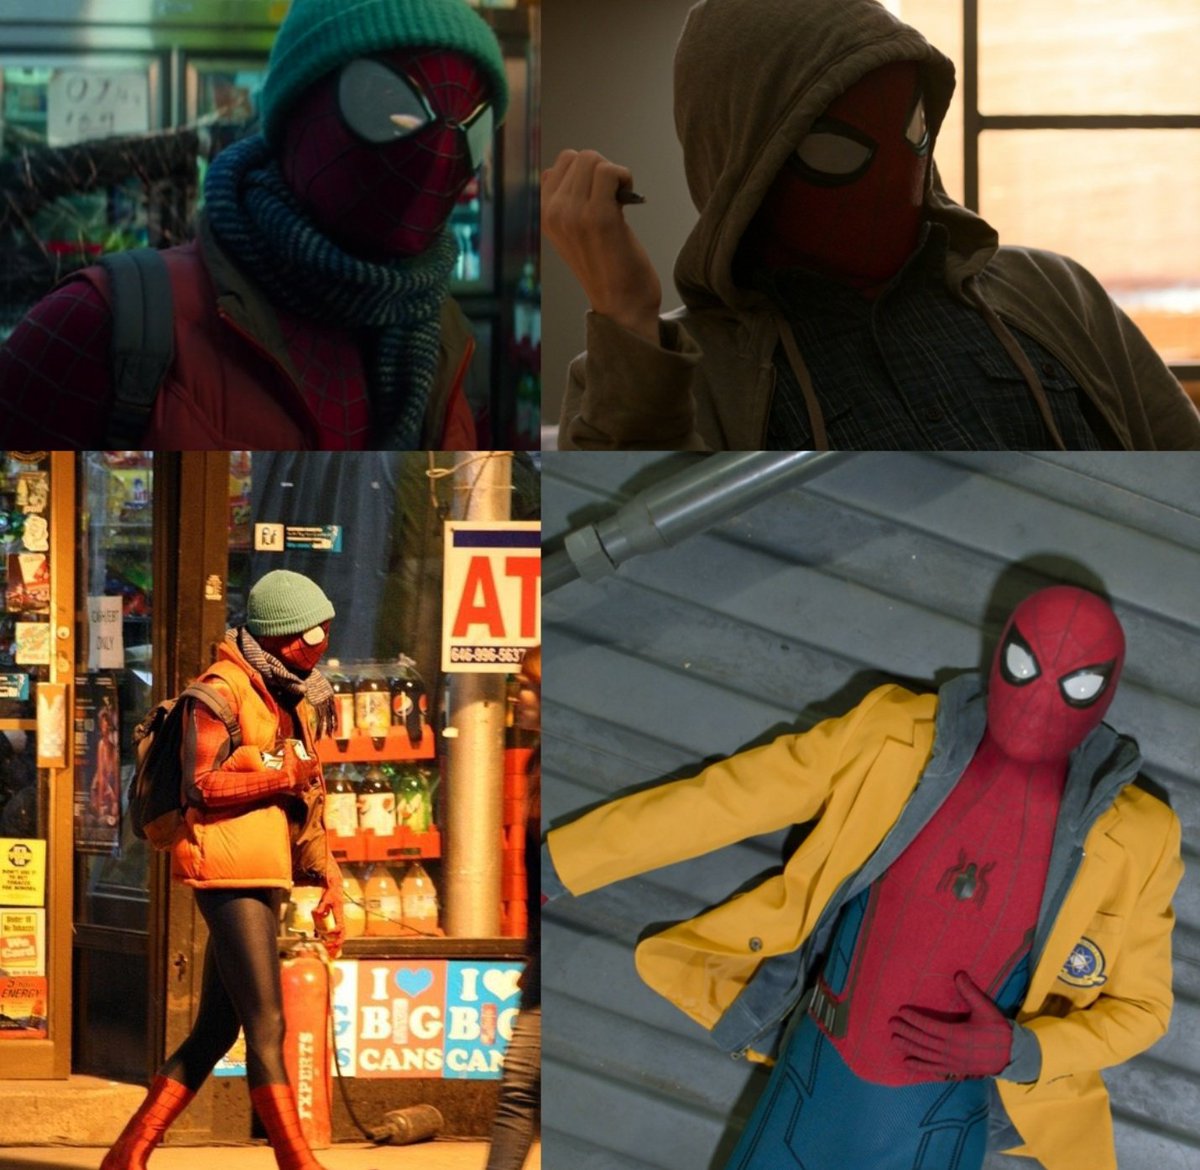 RT @spideygifs: I love when Spider-Man wears clothes over his suit https://t.co/Y4ryjhmqV7